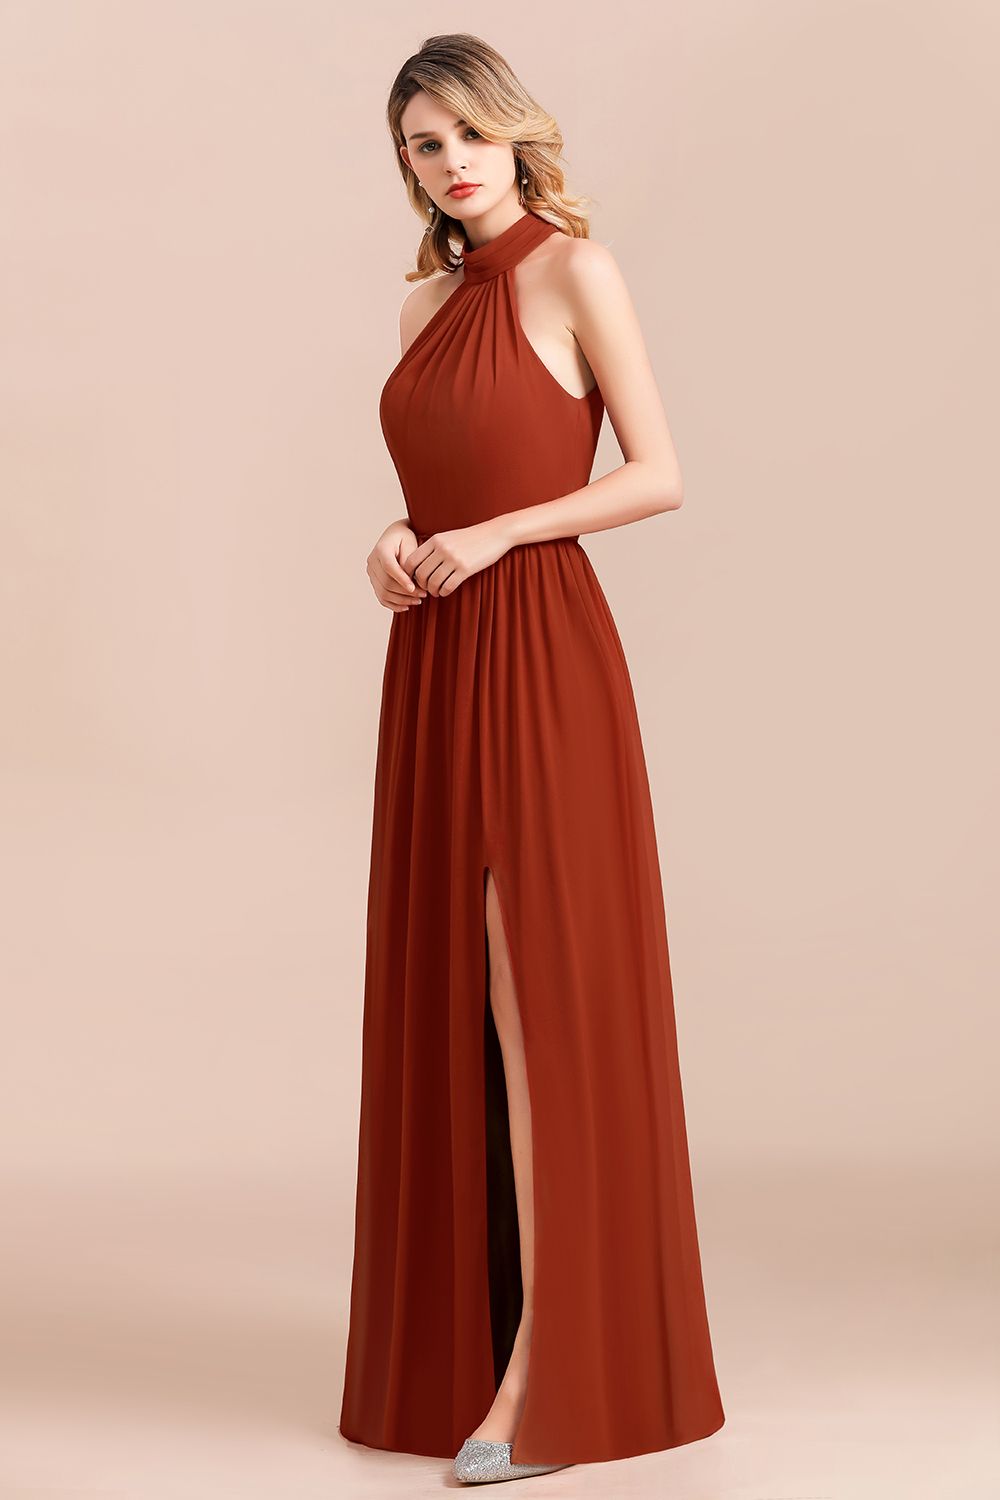 Long A-Line Halter Ruched Chiffon Bridesmaid Dress With Slit-BIZTUNNEL